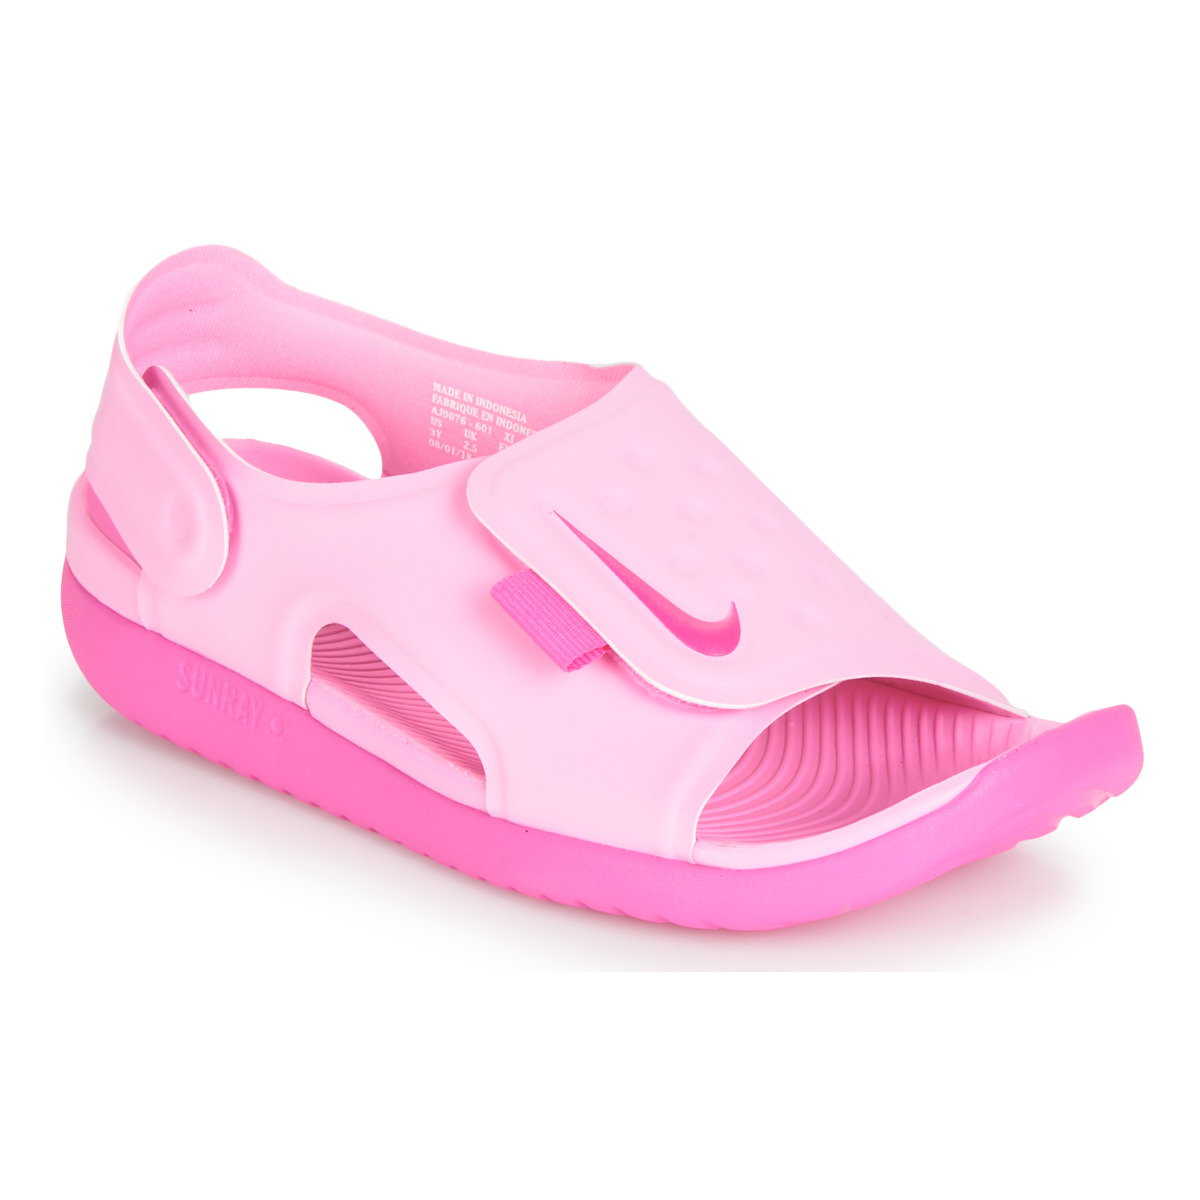 nike sunray sandals pink